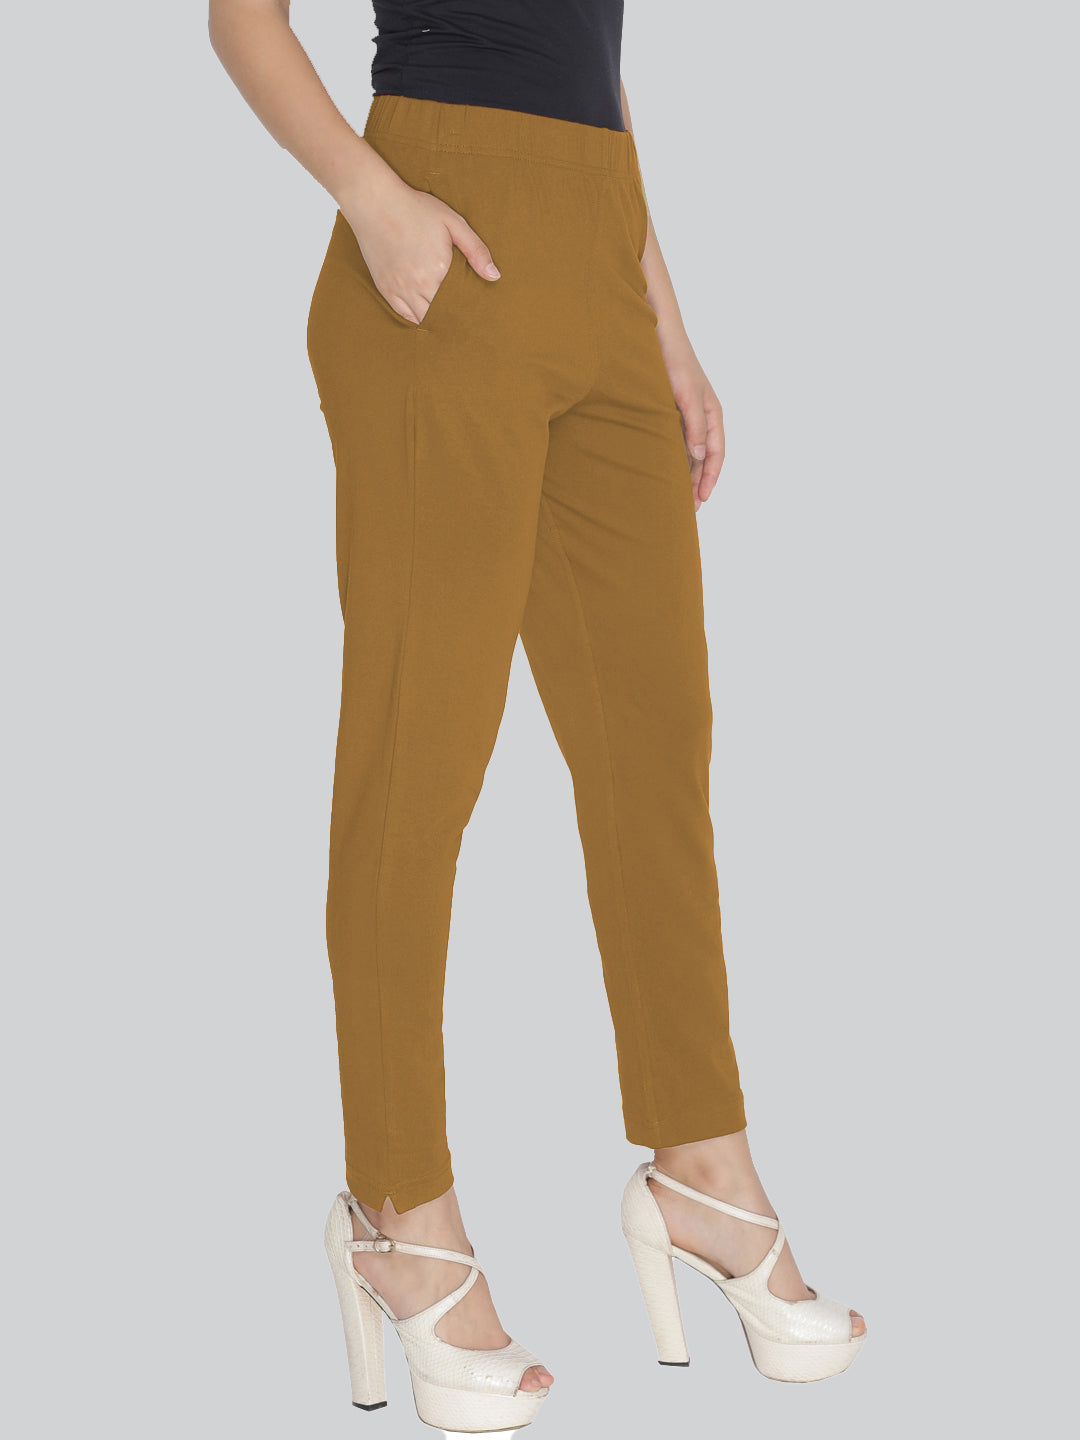 High Waist LUX Lyra Kurti Pant, Straight Fit at Rs 270 in Champawat